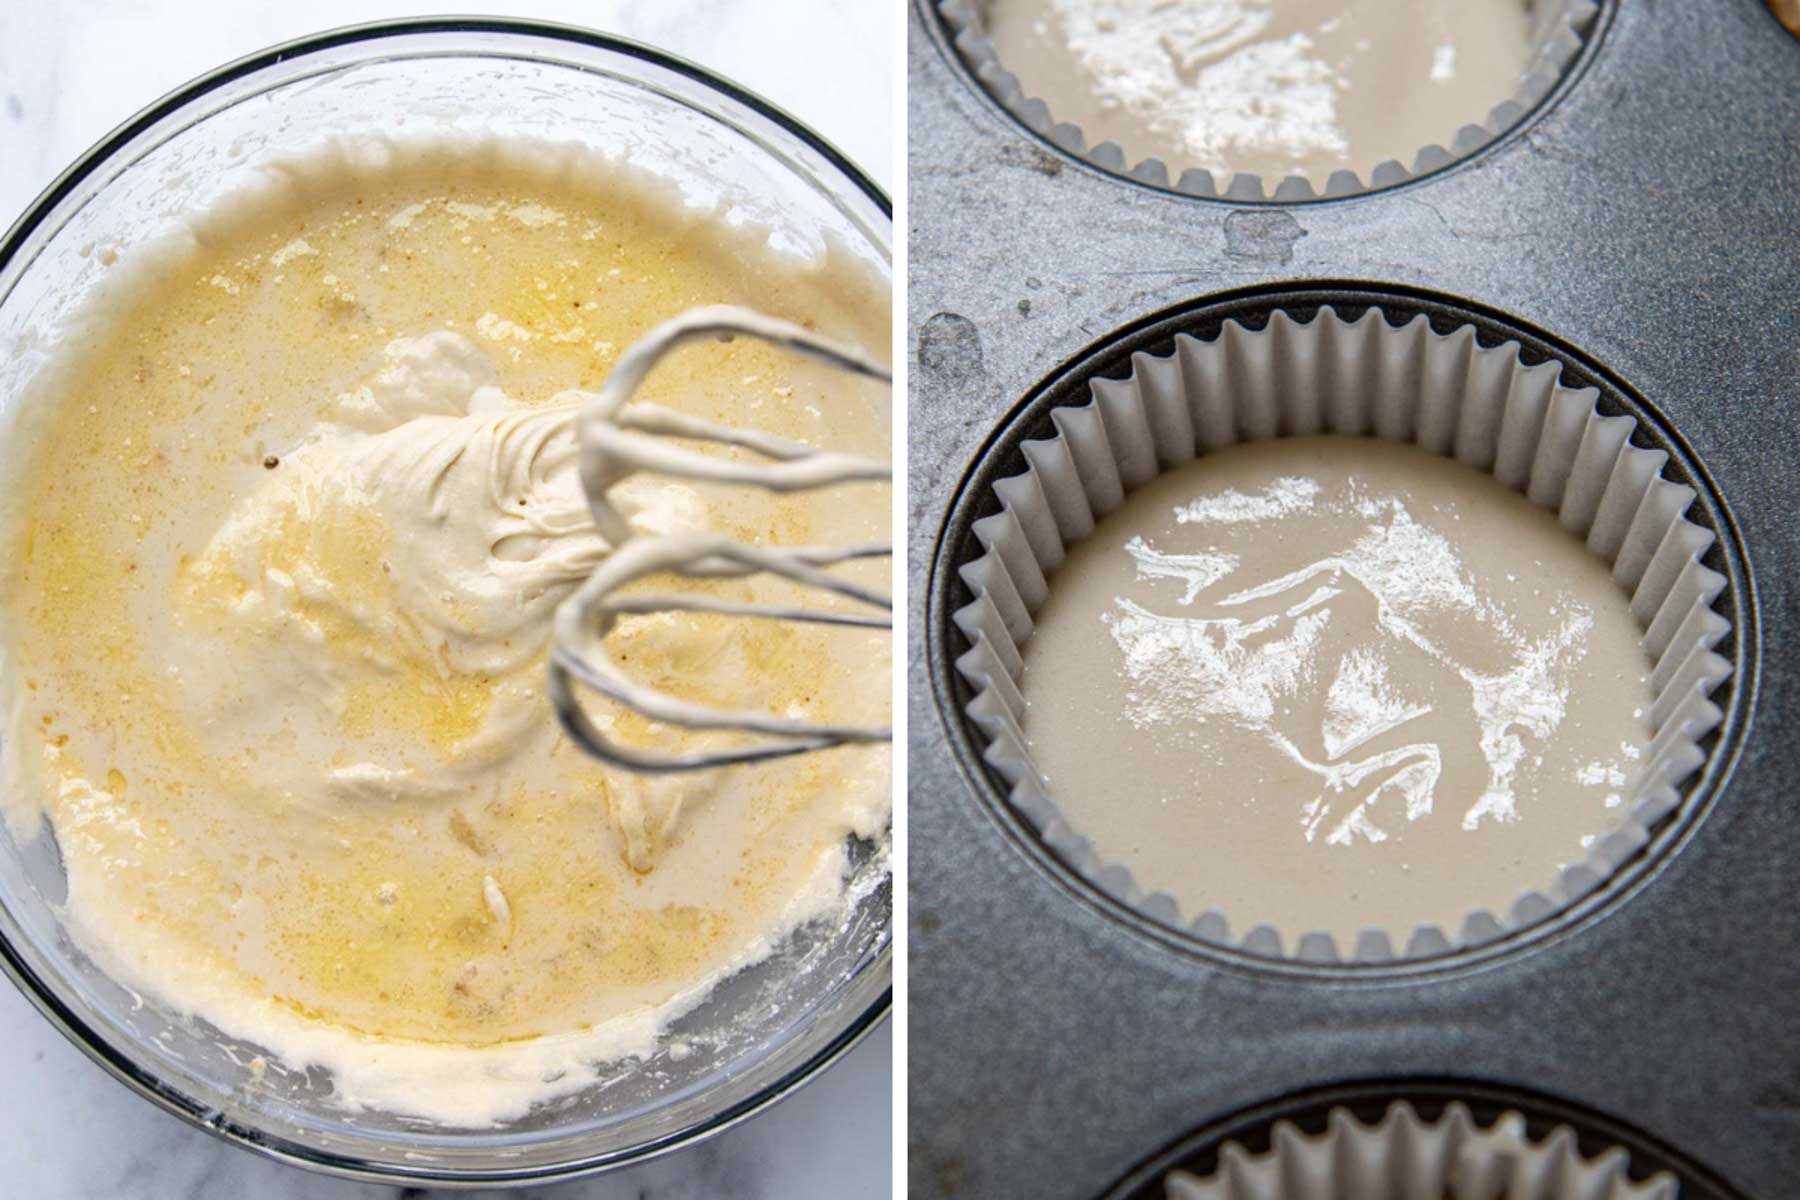 images showing batter and unbaked cupcakes in tin